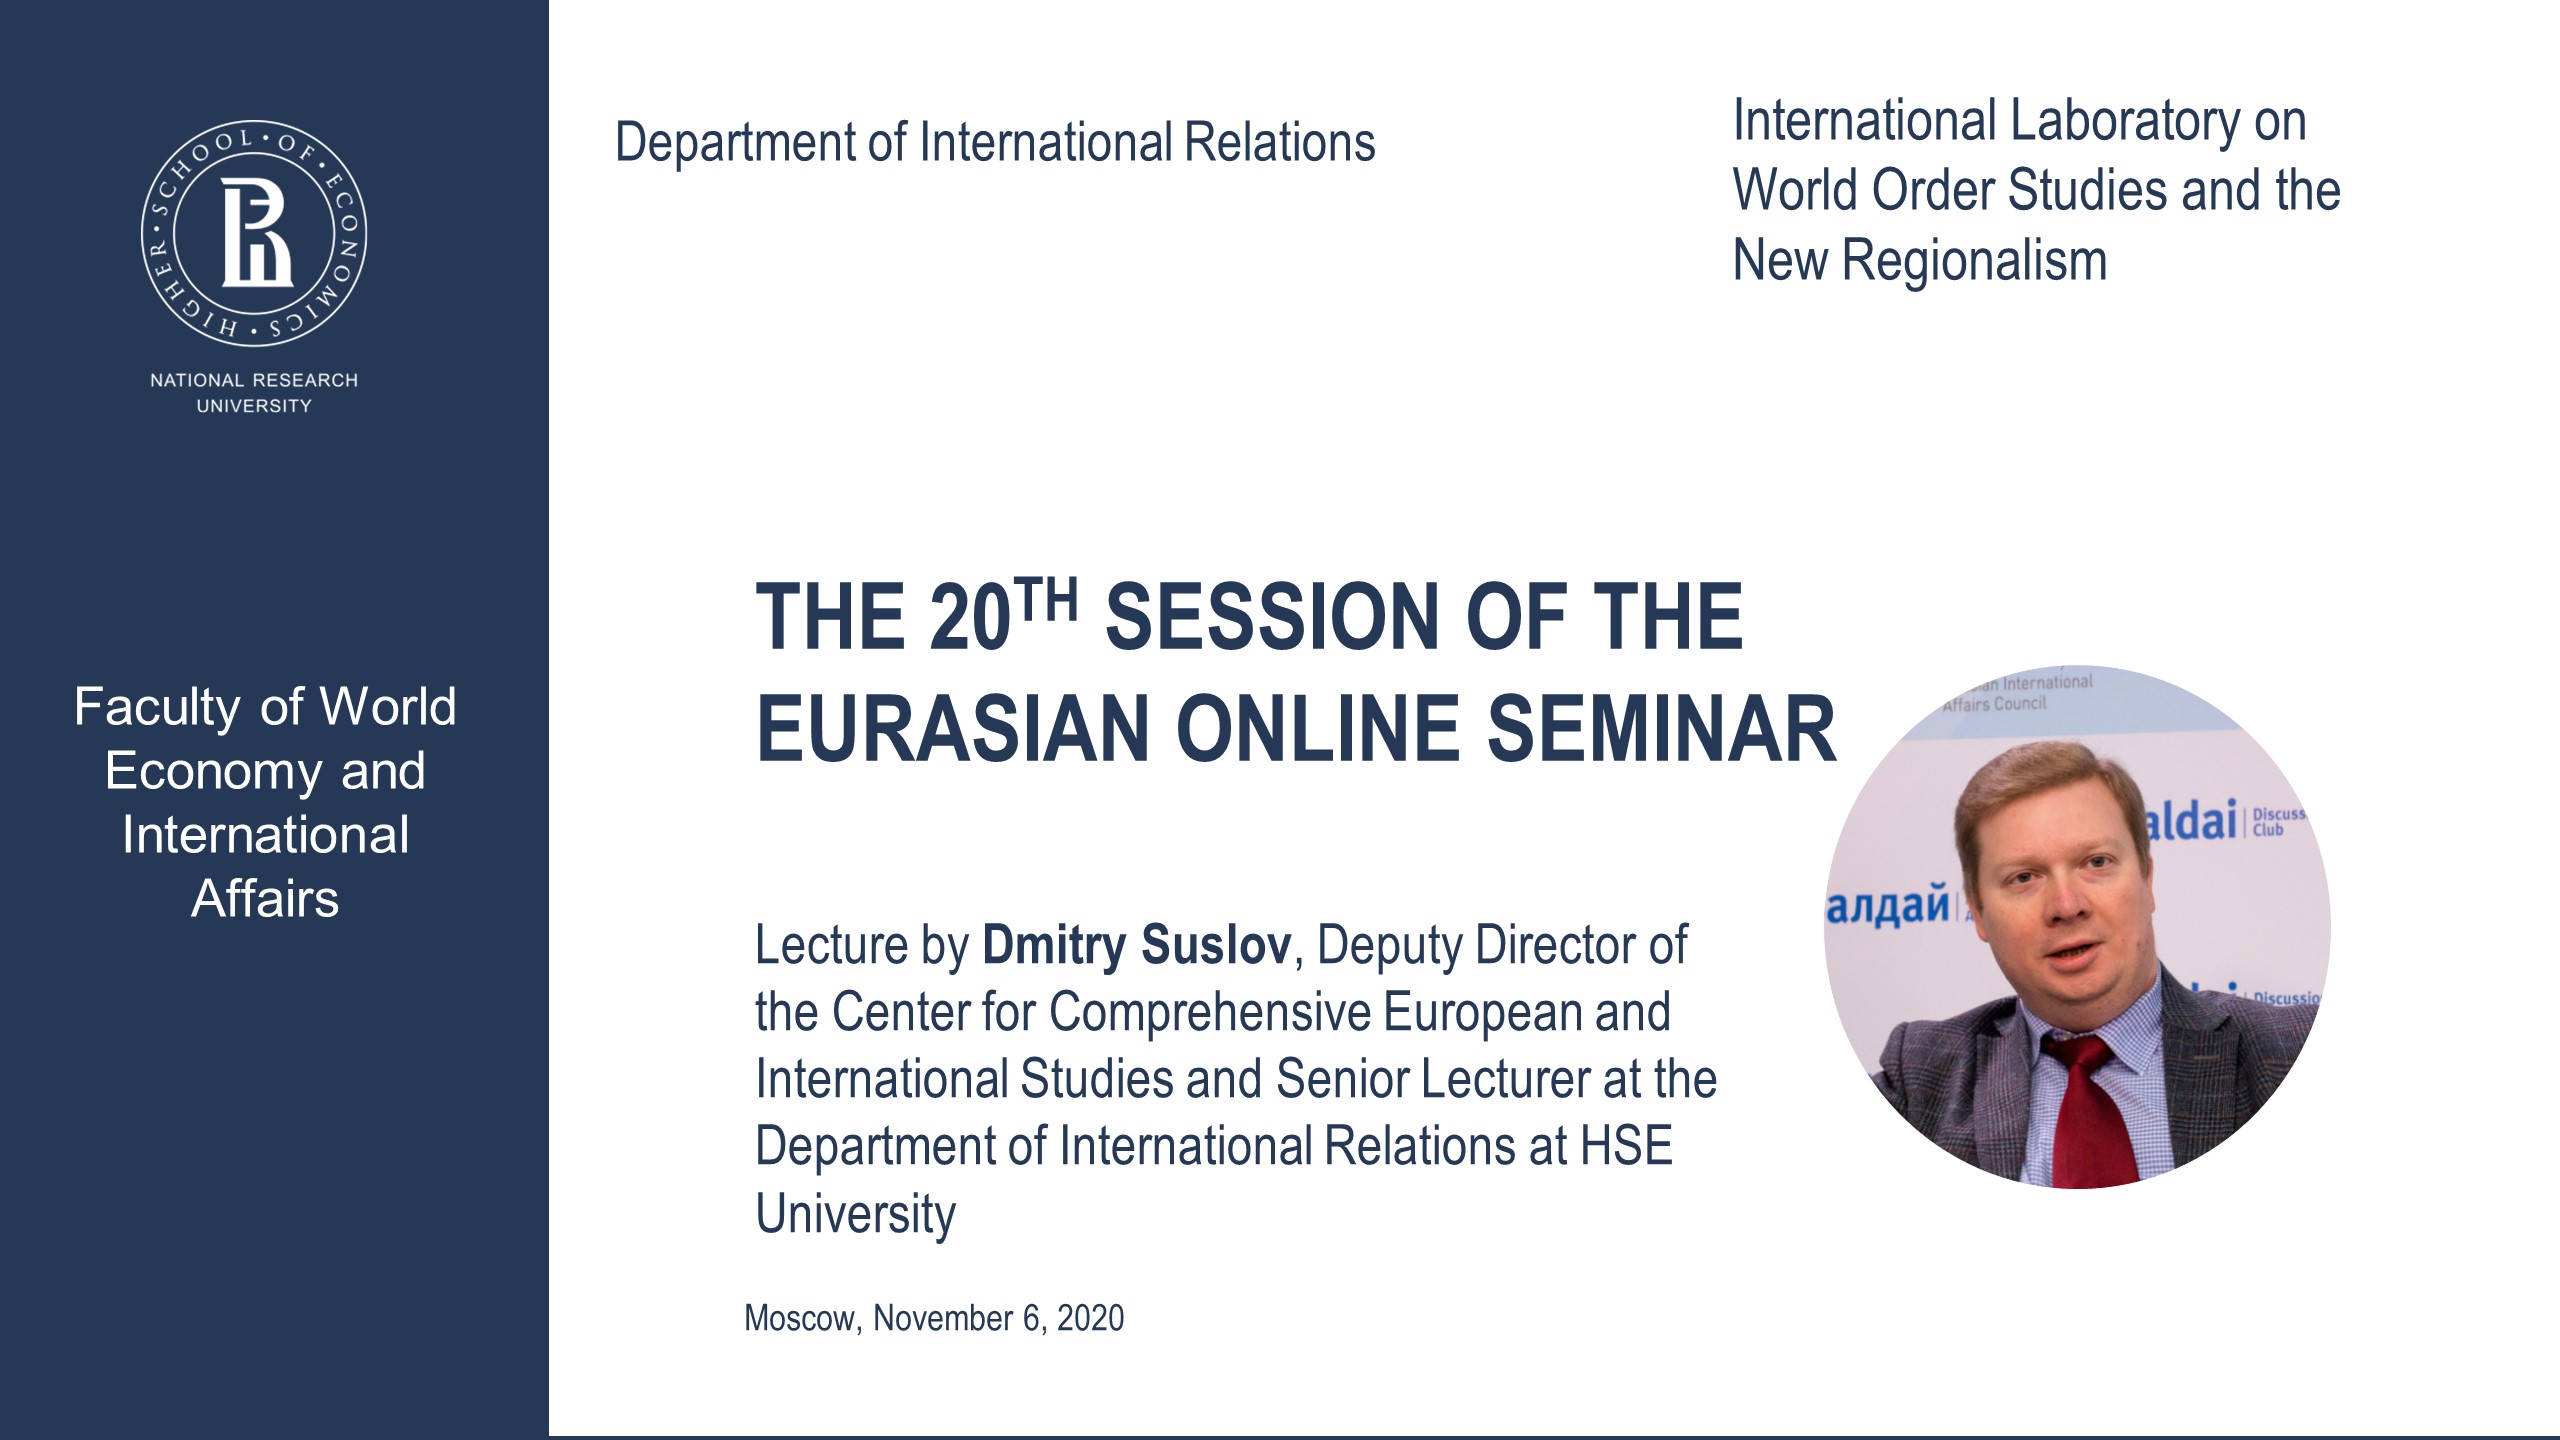 The 20th Session of Eurasian Online Seminar with Dmitry Suslov